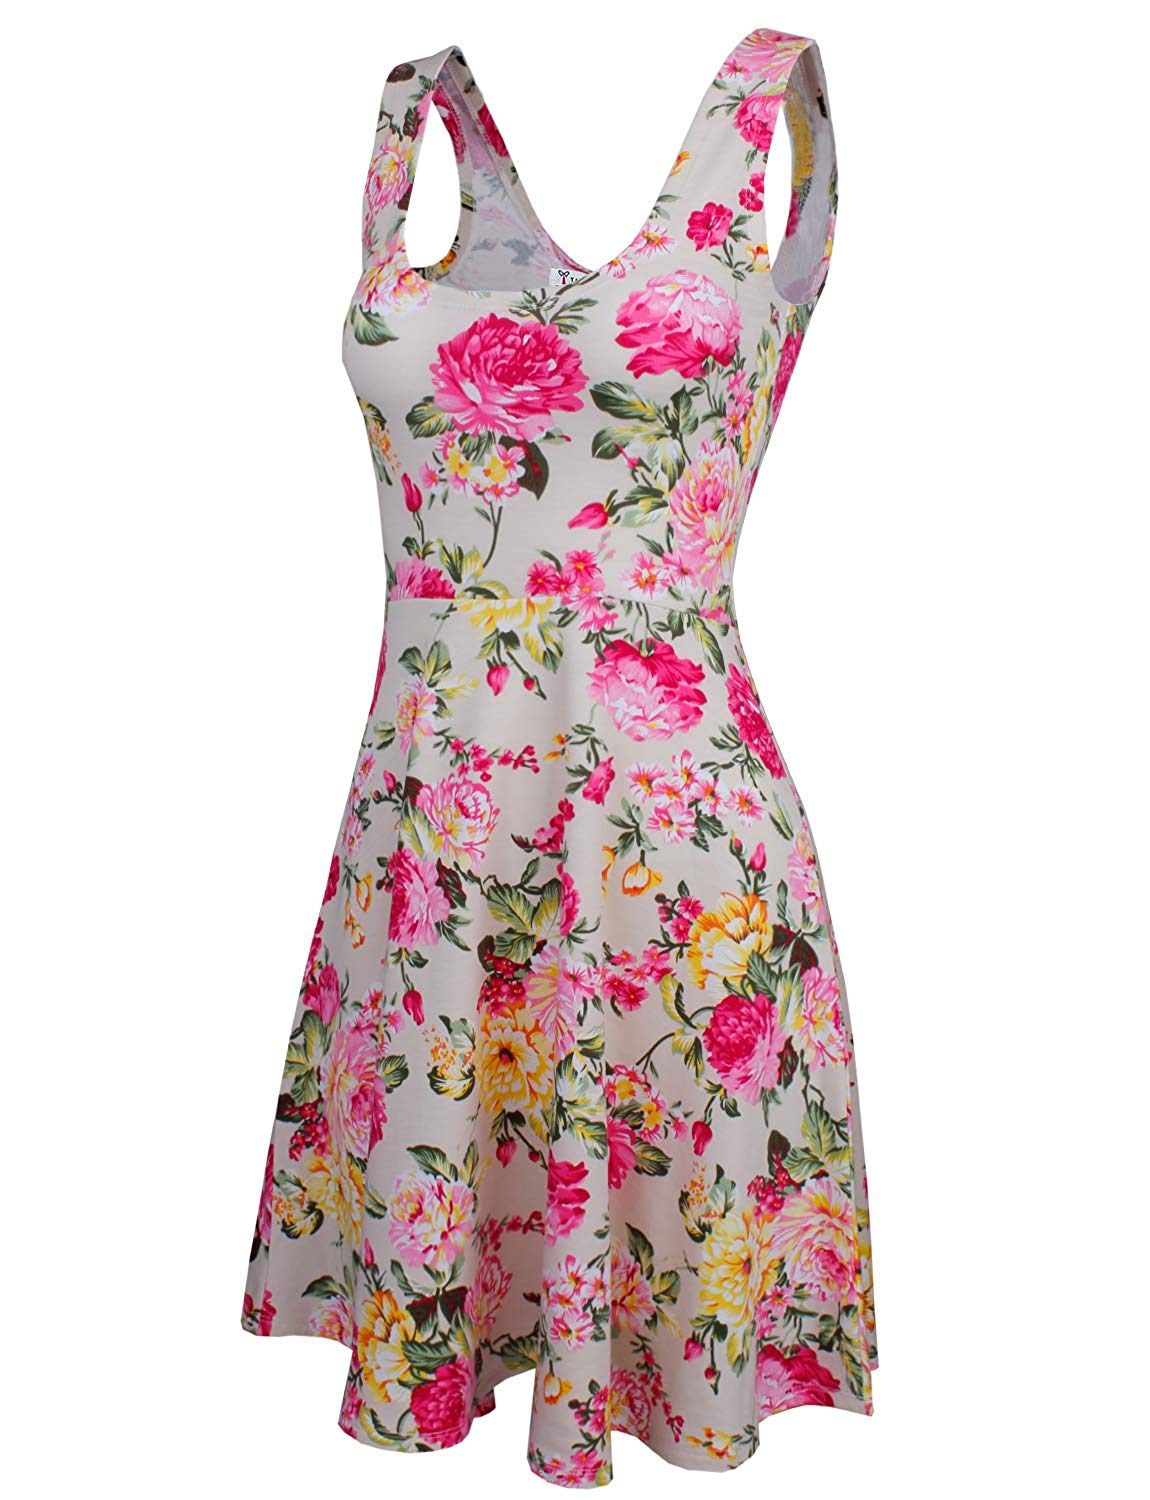 Ladies White Floral Print Dress – Casual Sleeveless Outfit – Fit And ...